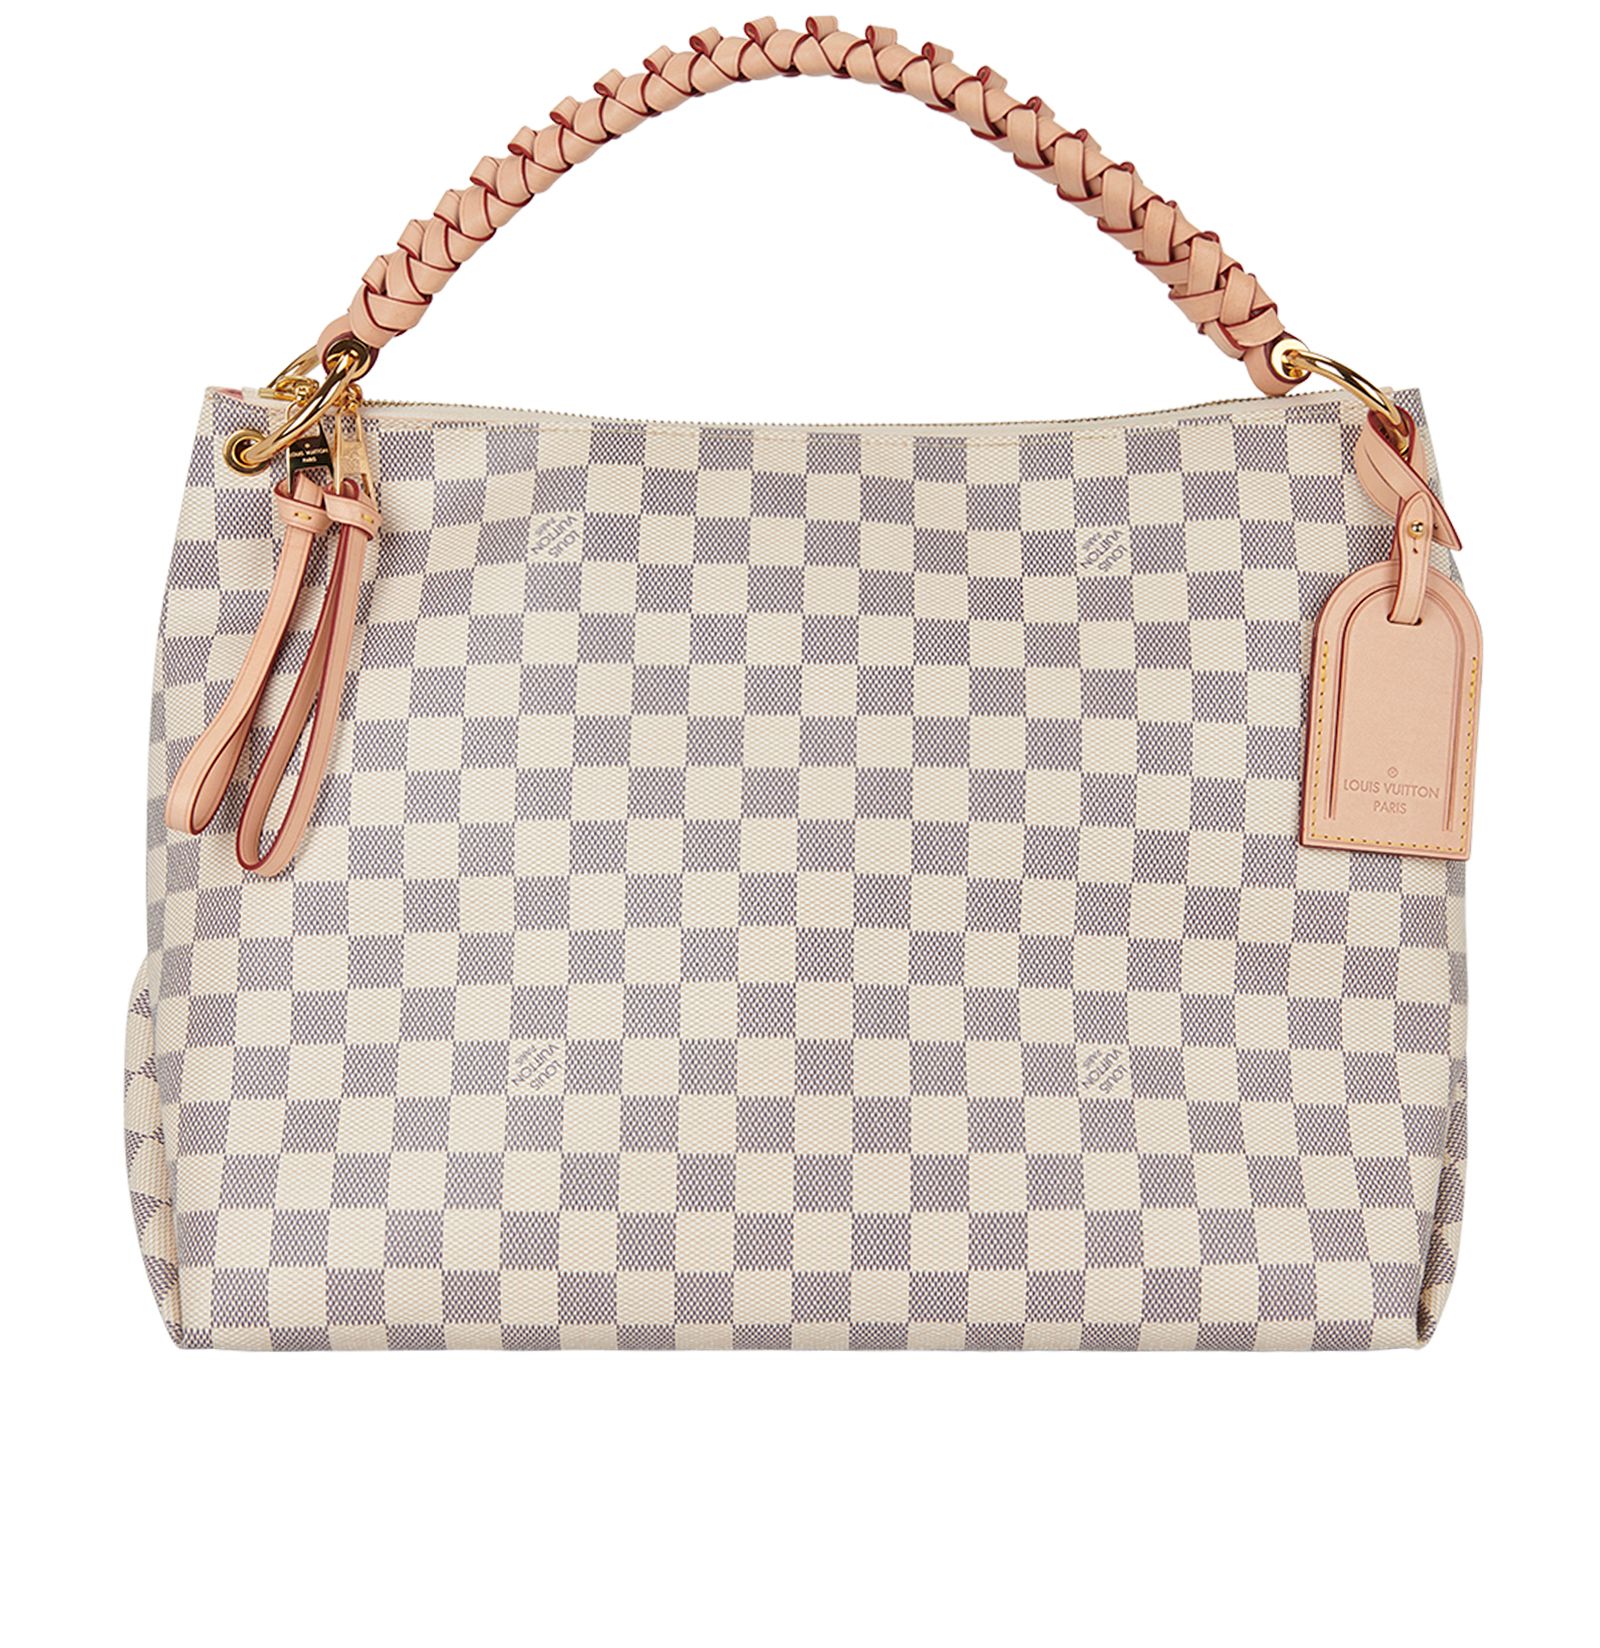 Lv Beaubourg Hobo Mm Reviewer